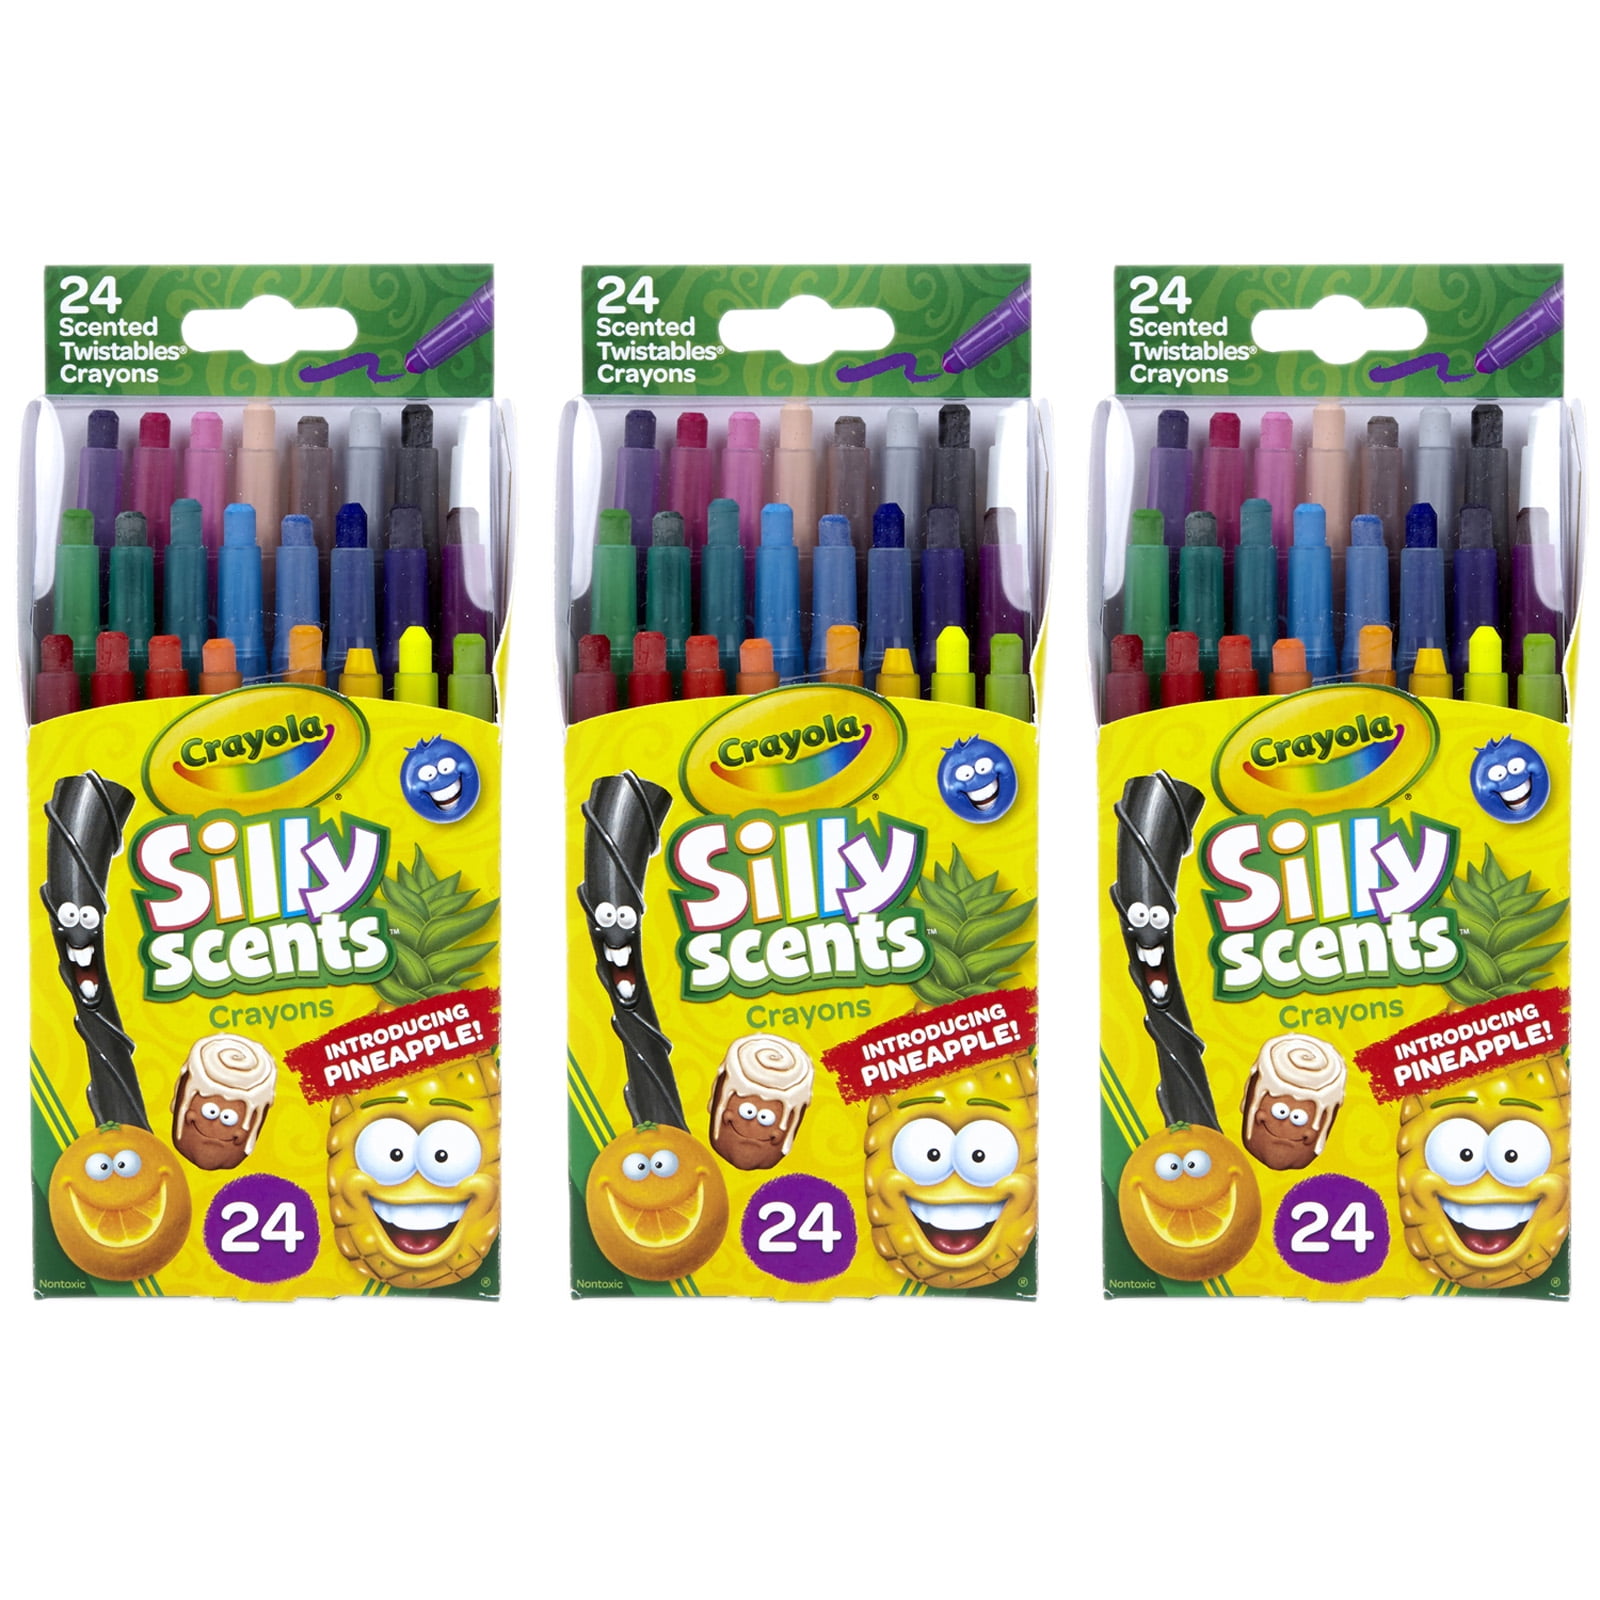 Crayola Silly Scents Twistable Crayons (12-Pack) for $2.20 - Kids  Activities, Saving Money, Home Management